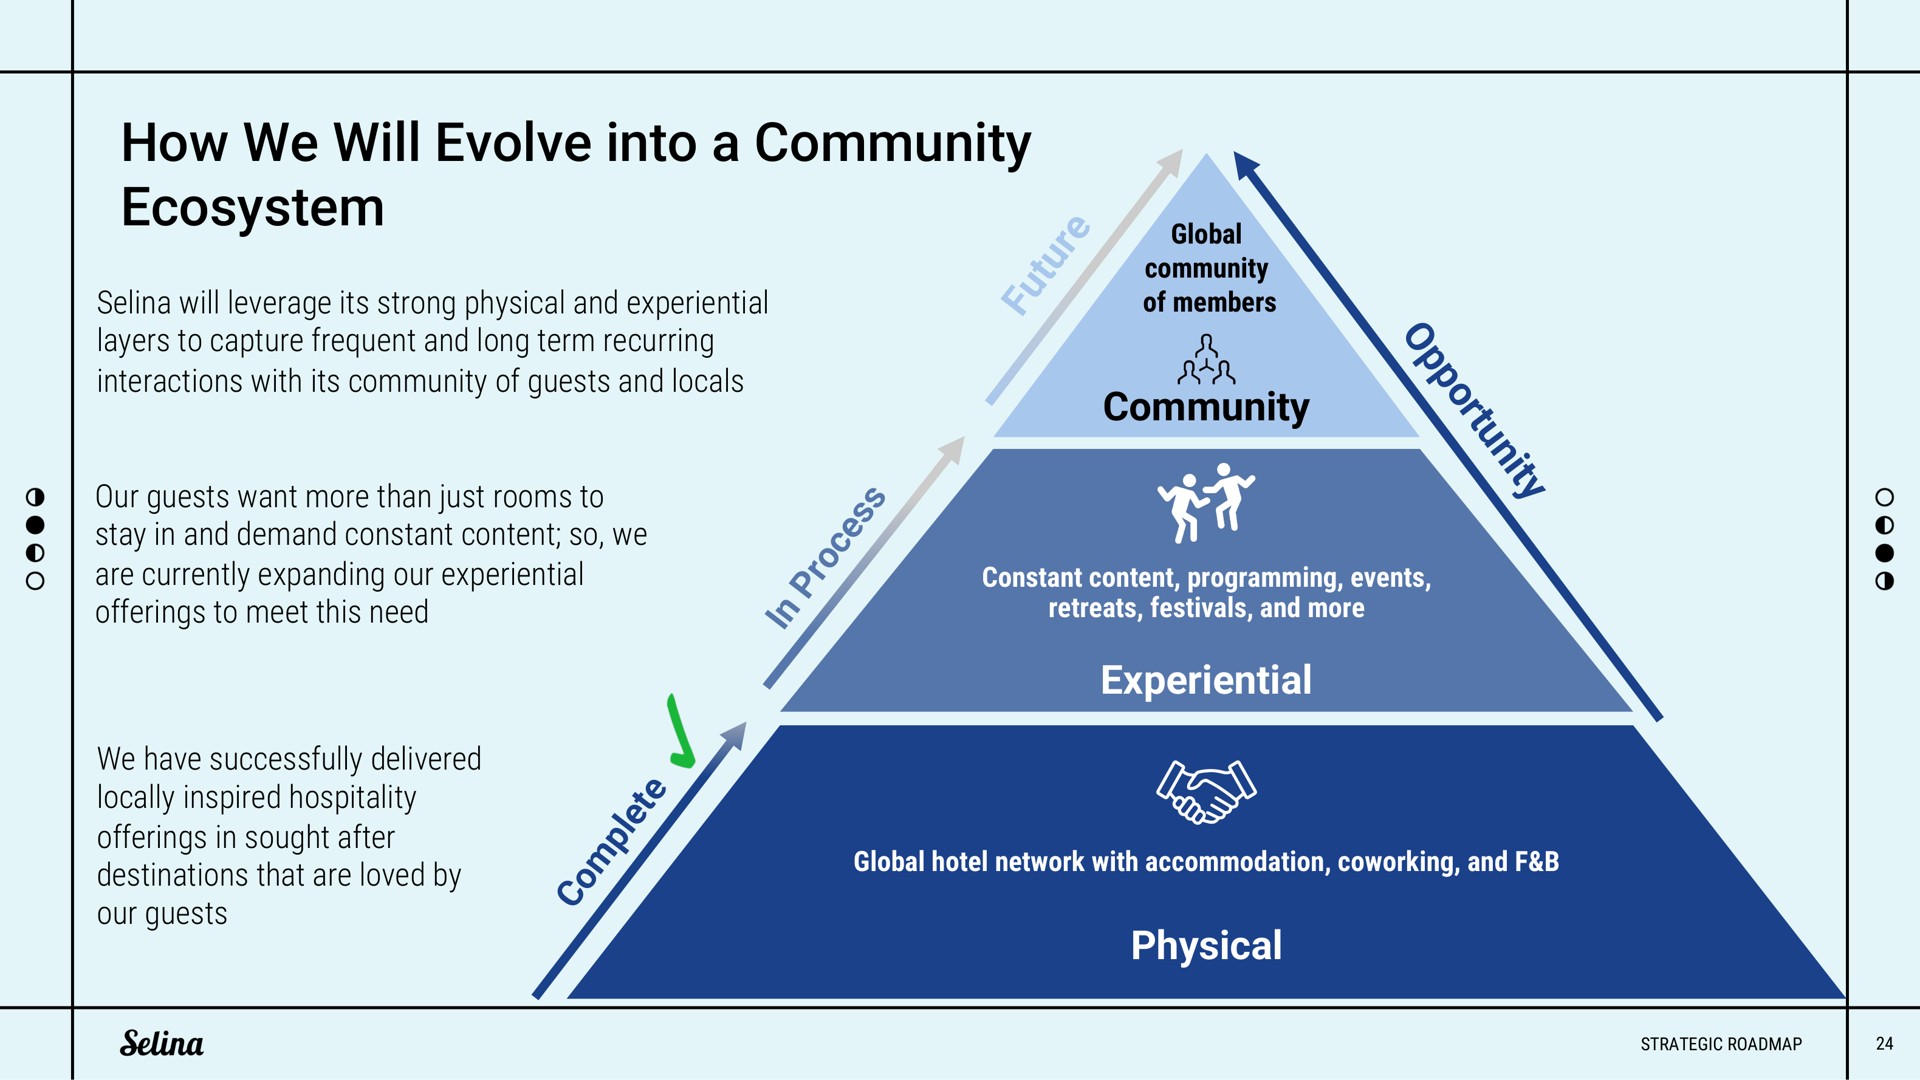 how we will evolve into a community ecosystem in process future community experiential complete physical | Selina